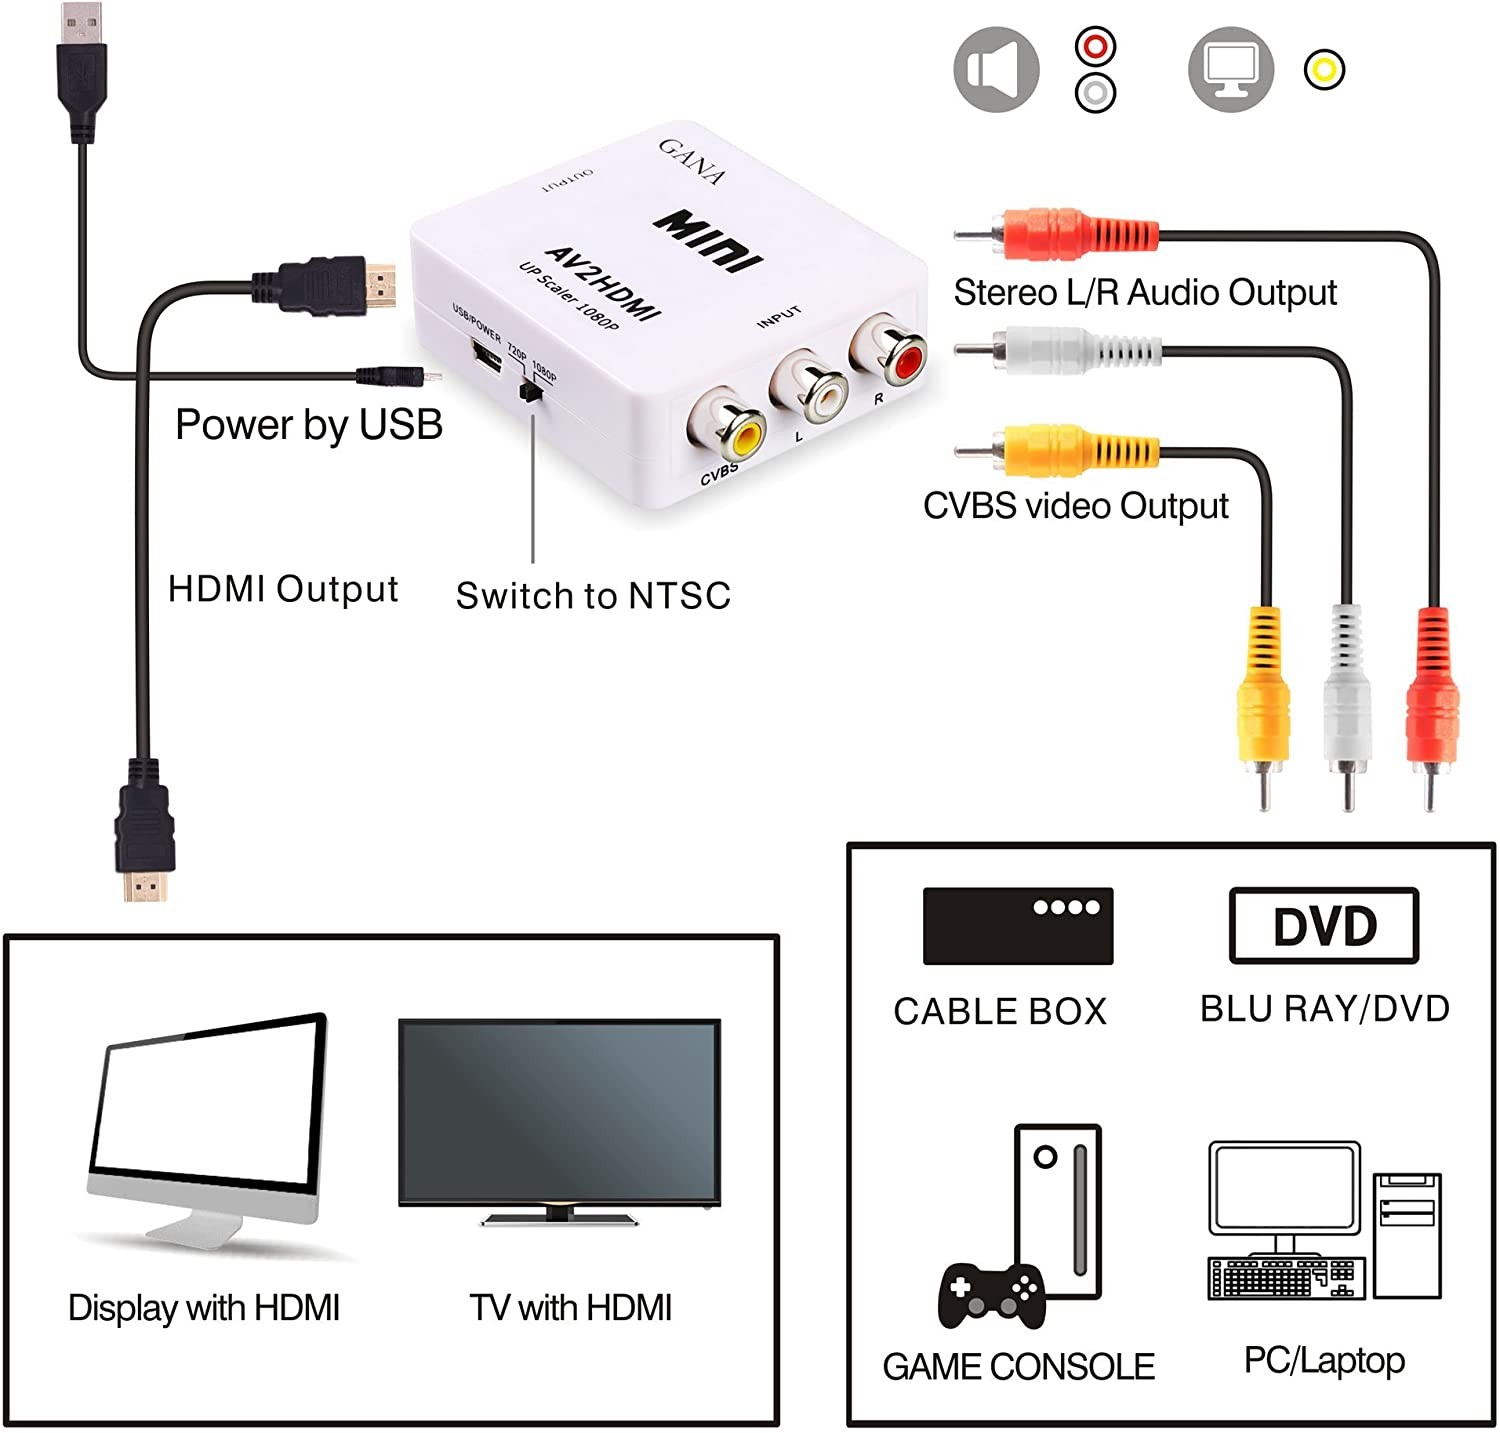 Hdmi to Rca Converter Wiring Diagram Av to Hdmi Gana 1080p Mini Rca Posite Cvbs Av to Hdmi Video Audio Converter Adapter Supporting Pal Ntsc with Usb Charge Cable for Pc Laptop Xbox Of Hdmi to Rca Converter Wiring Diagram